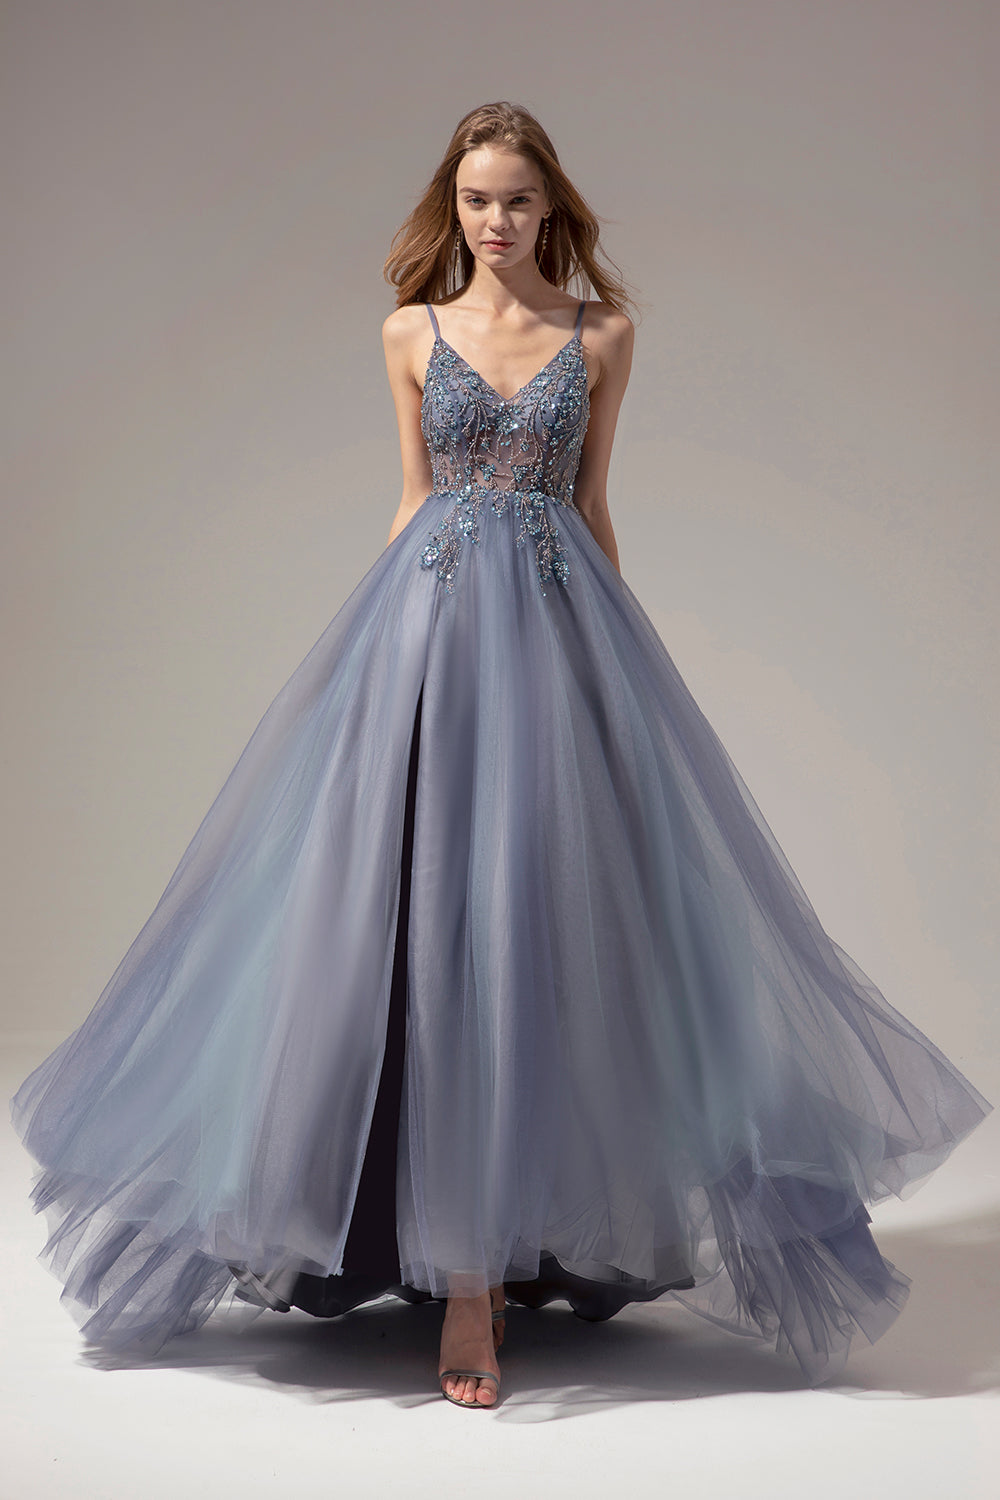 14+ Blue And Gray Prom Dress